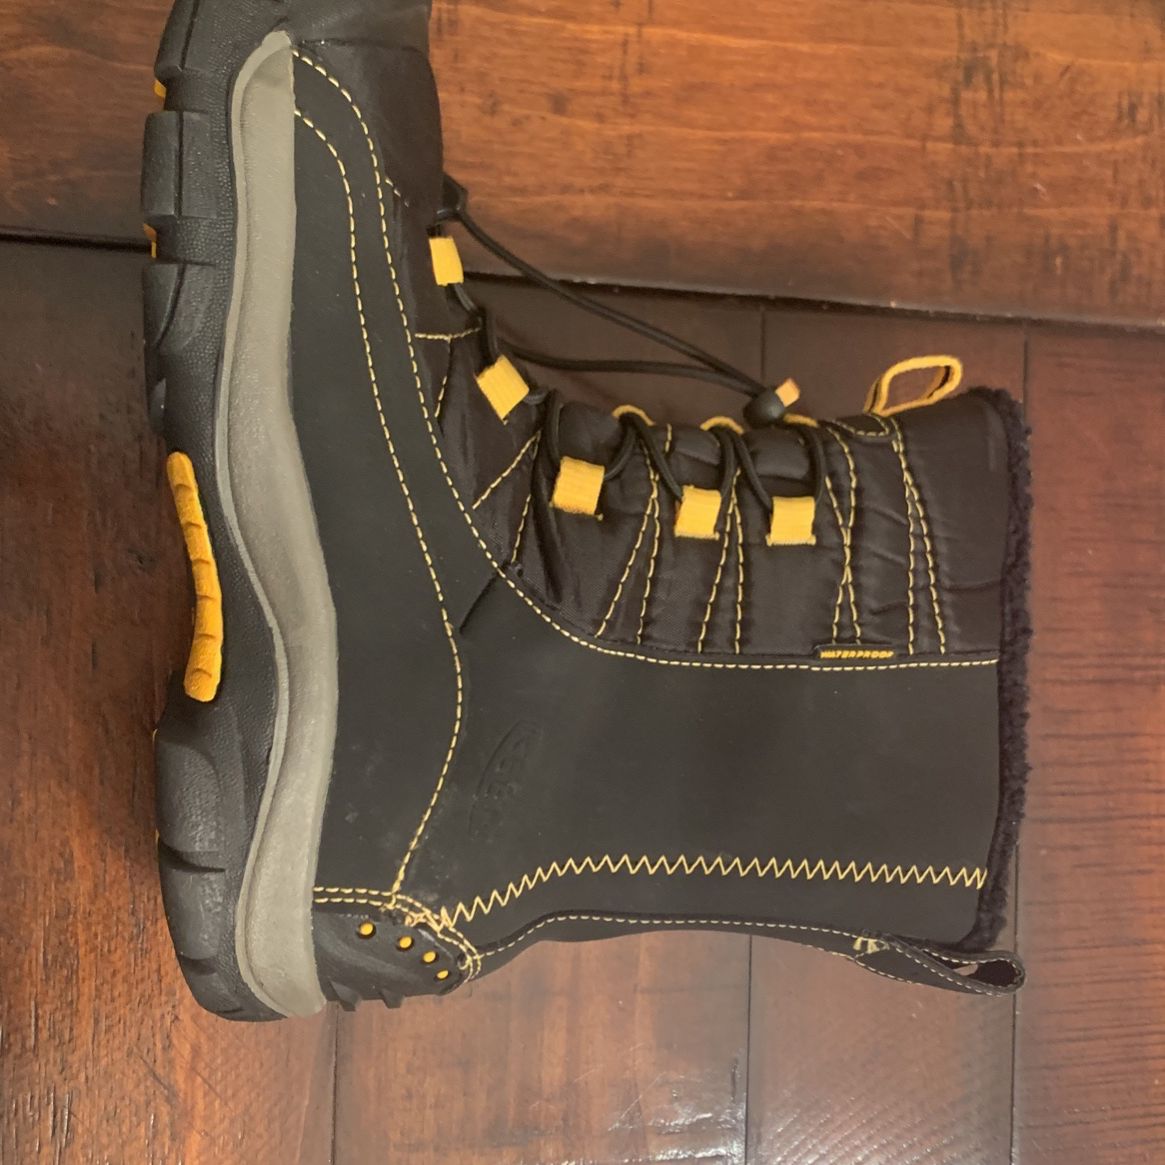 Keen Boots Size 6